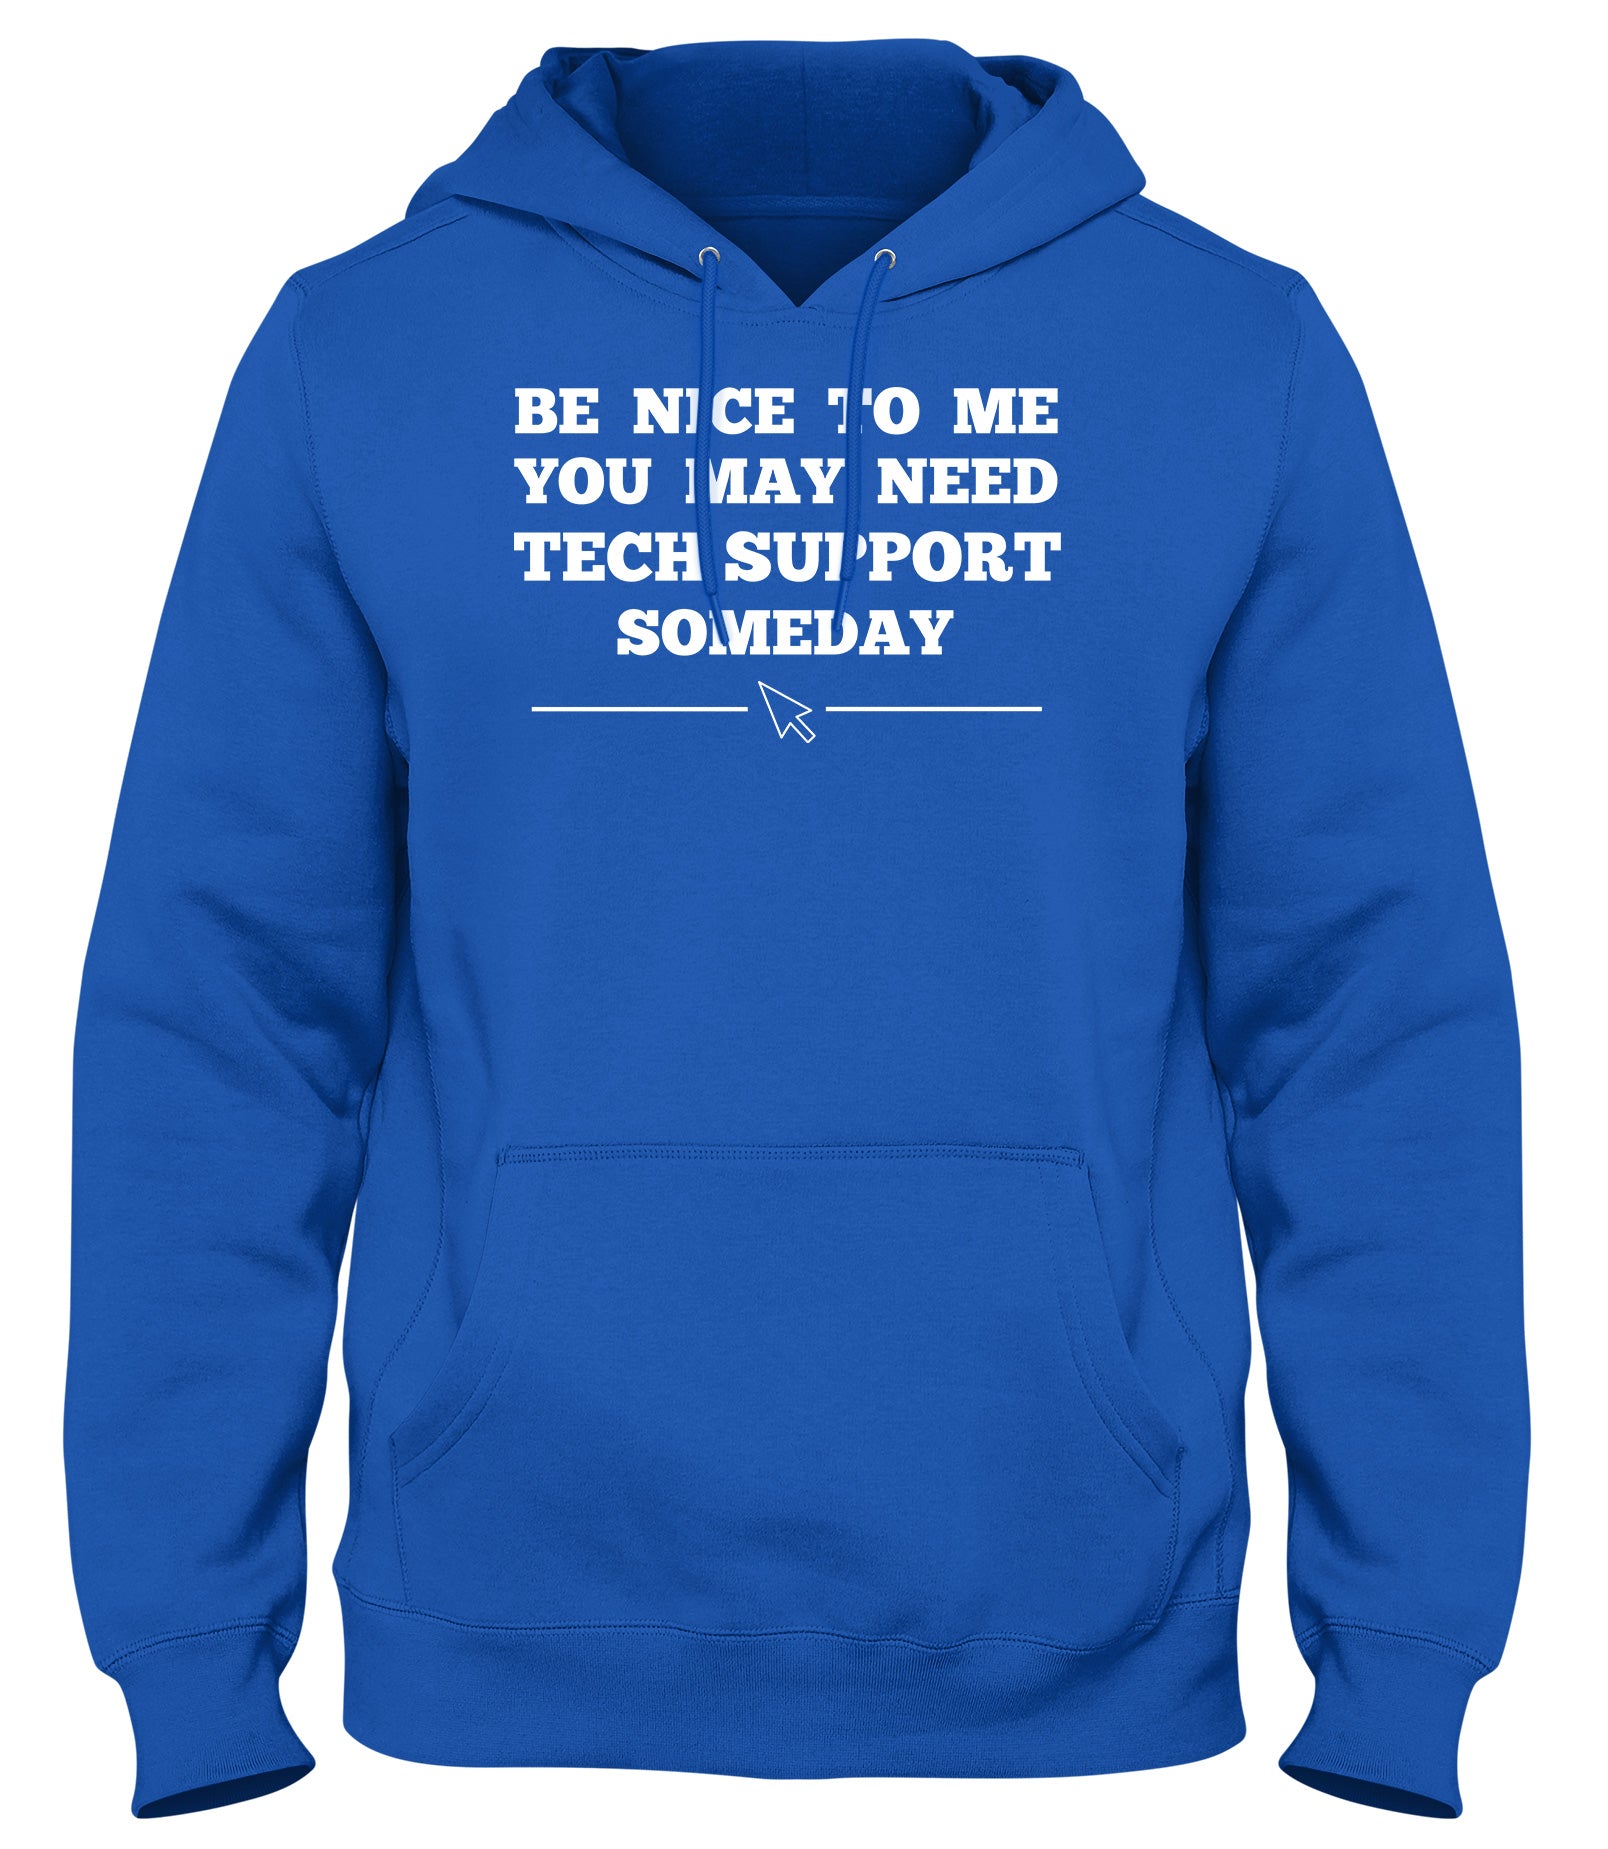 BE NICE TO ME YOU MAY NEED MY TECH SUPPORT SOMEDAY MENS WOMENS LADIES UNISEX FUNNY SLOGAN HOODIE